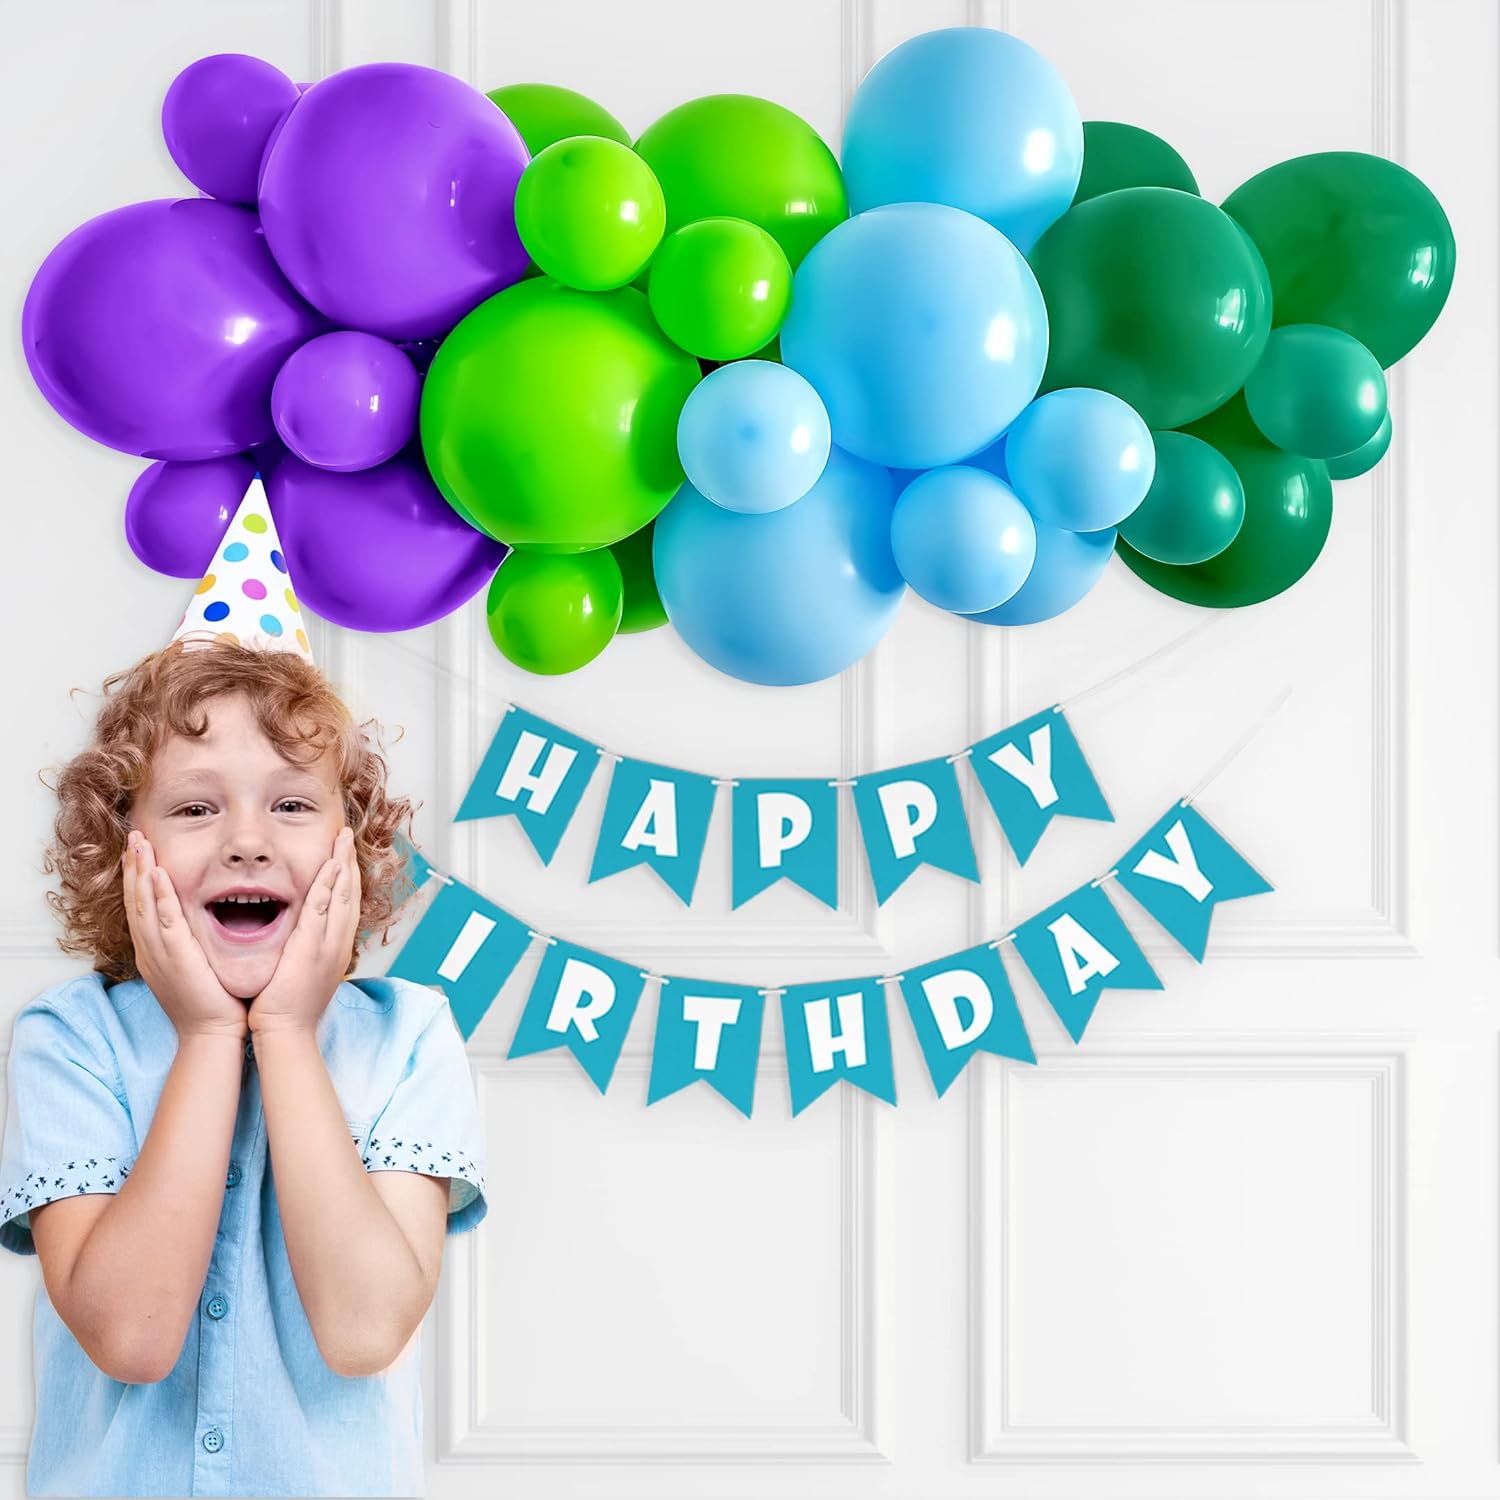 Babies Birthday Decoration with vibrant colors